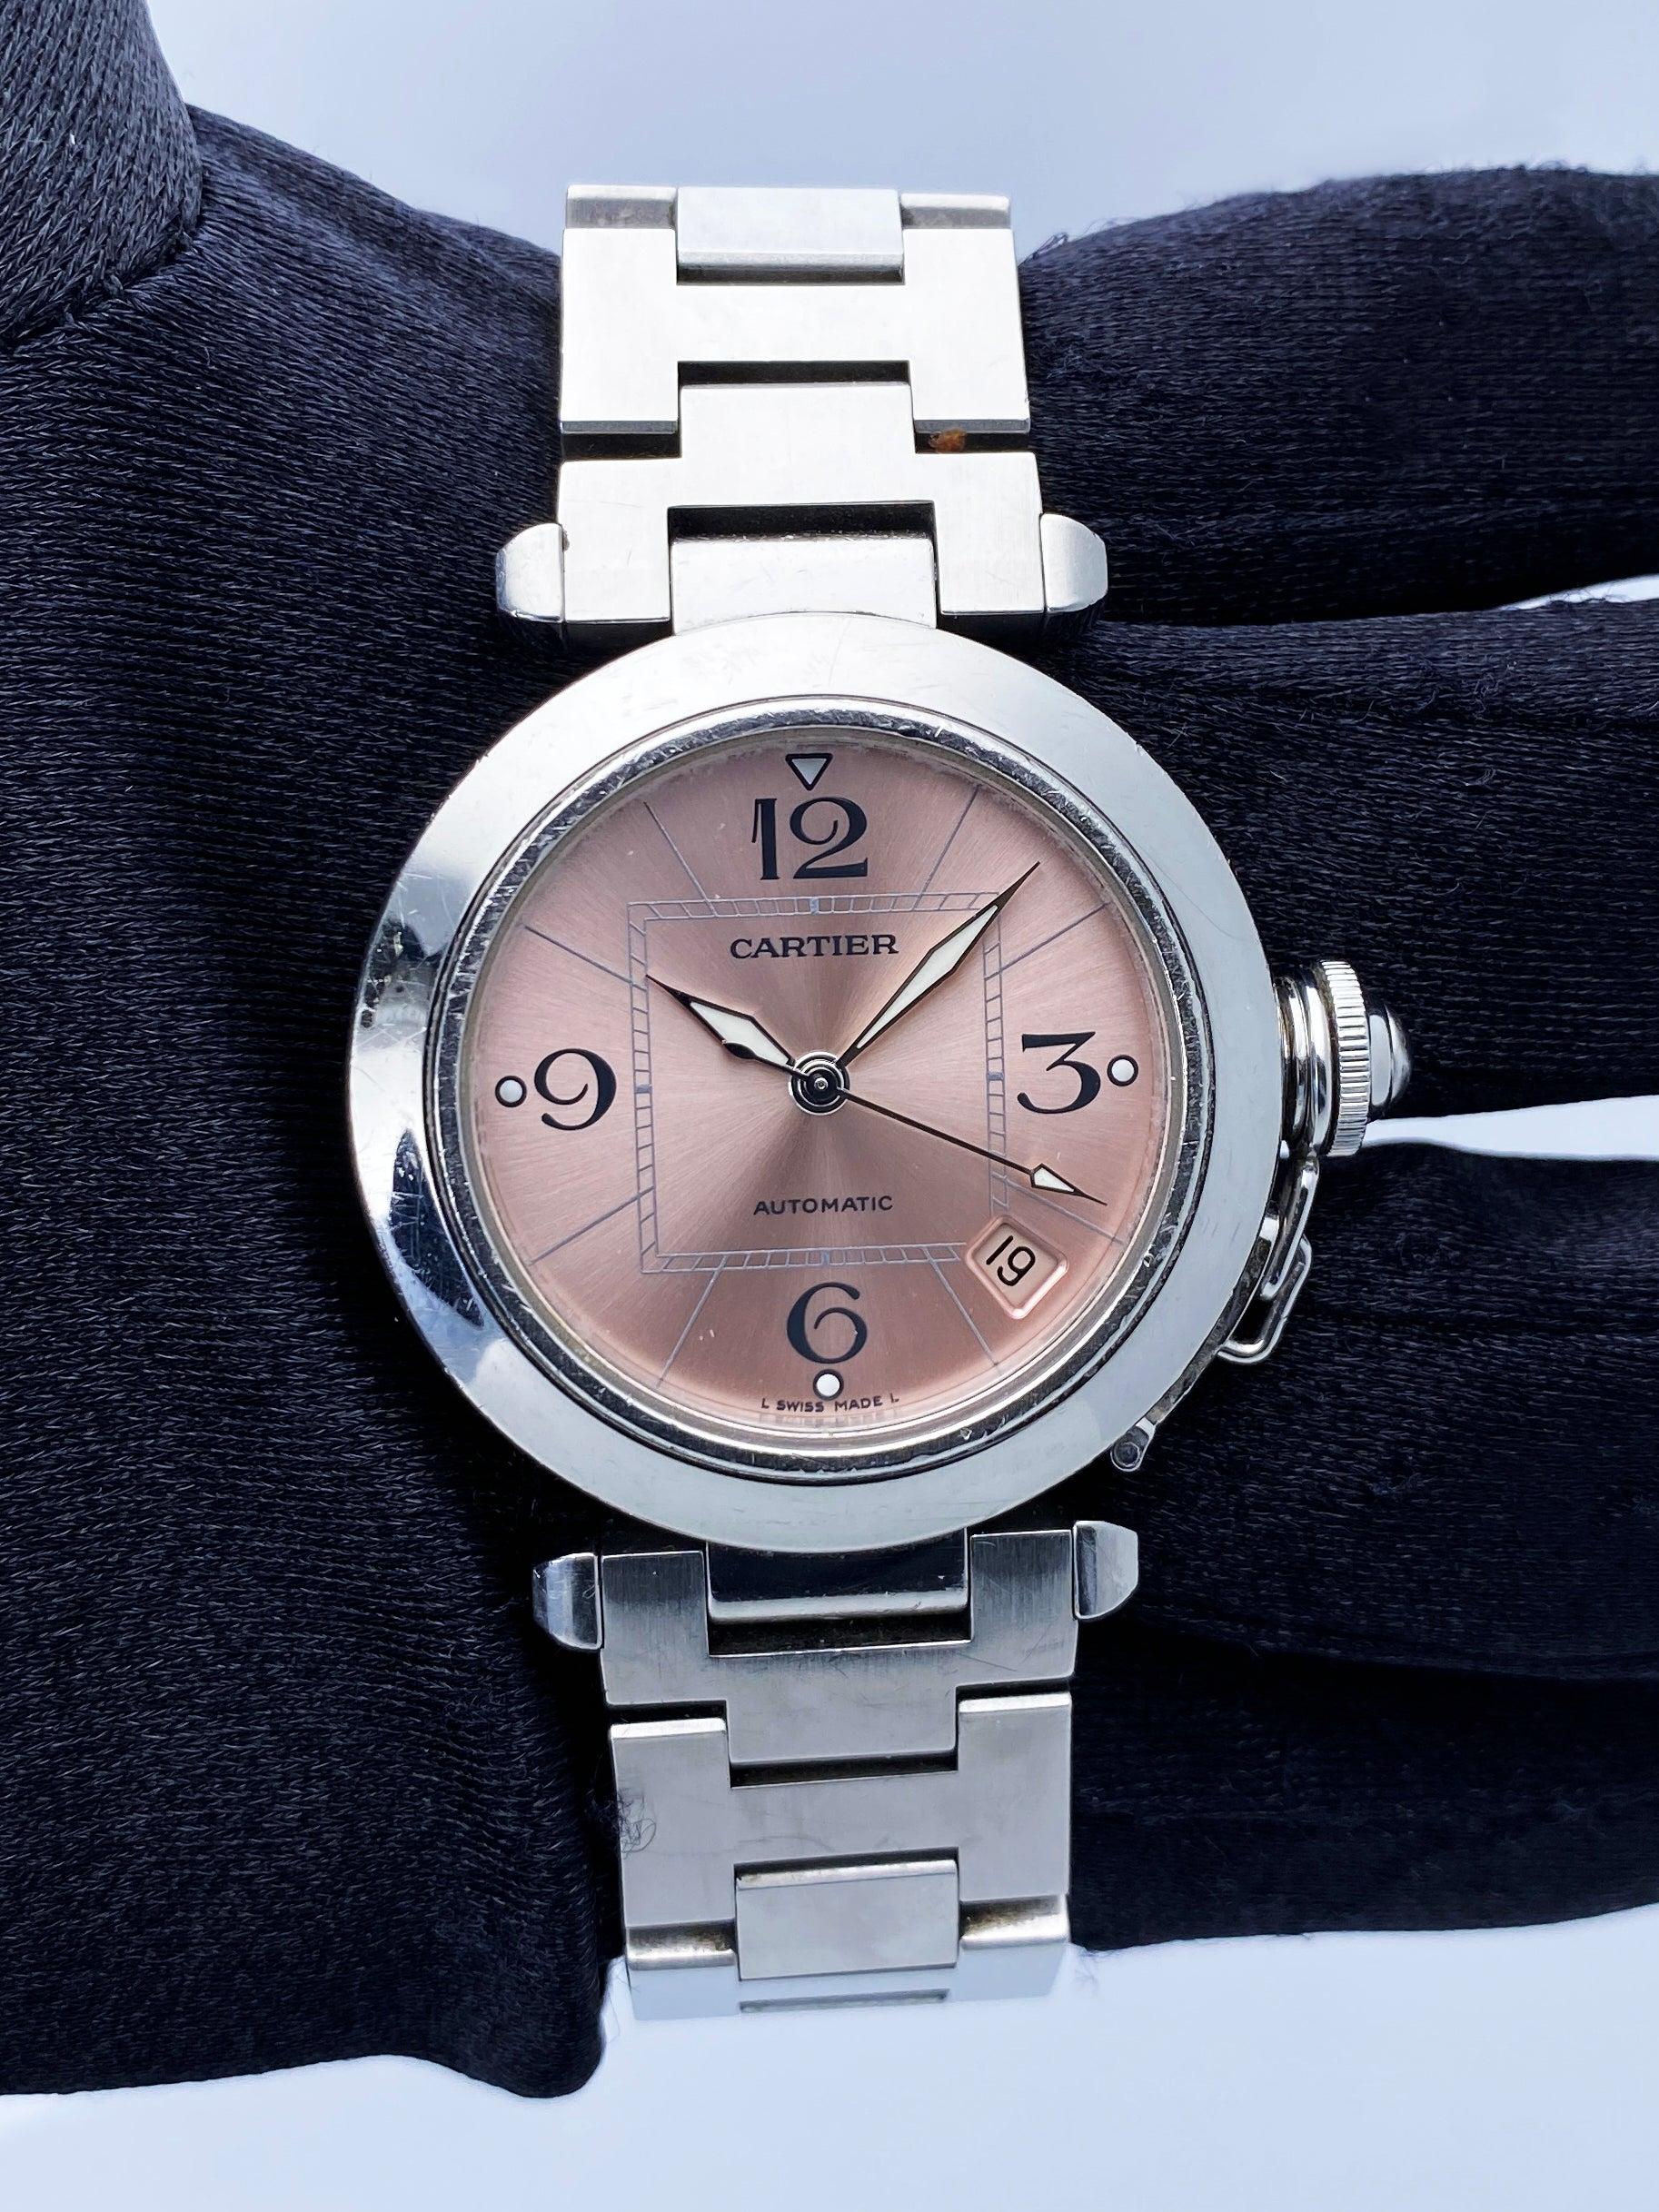 Cartier Pasha 2324 Ladies Watch. 36mm stainless steel case with stainless steel smooth bezel. Pink dial with blue hands and Arabic numeral hour markers. Minute markers on the inner dial. Date display between 4 and 5 o'clock position. Stainless steel